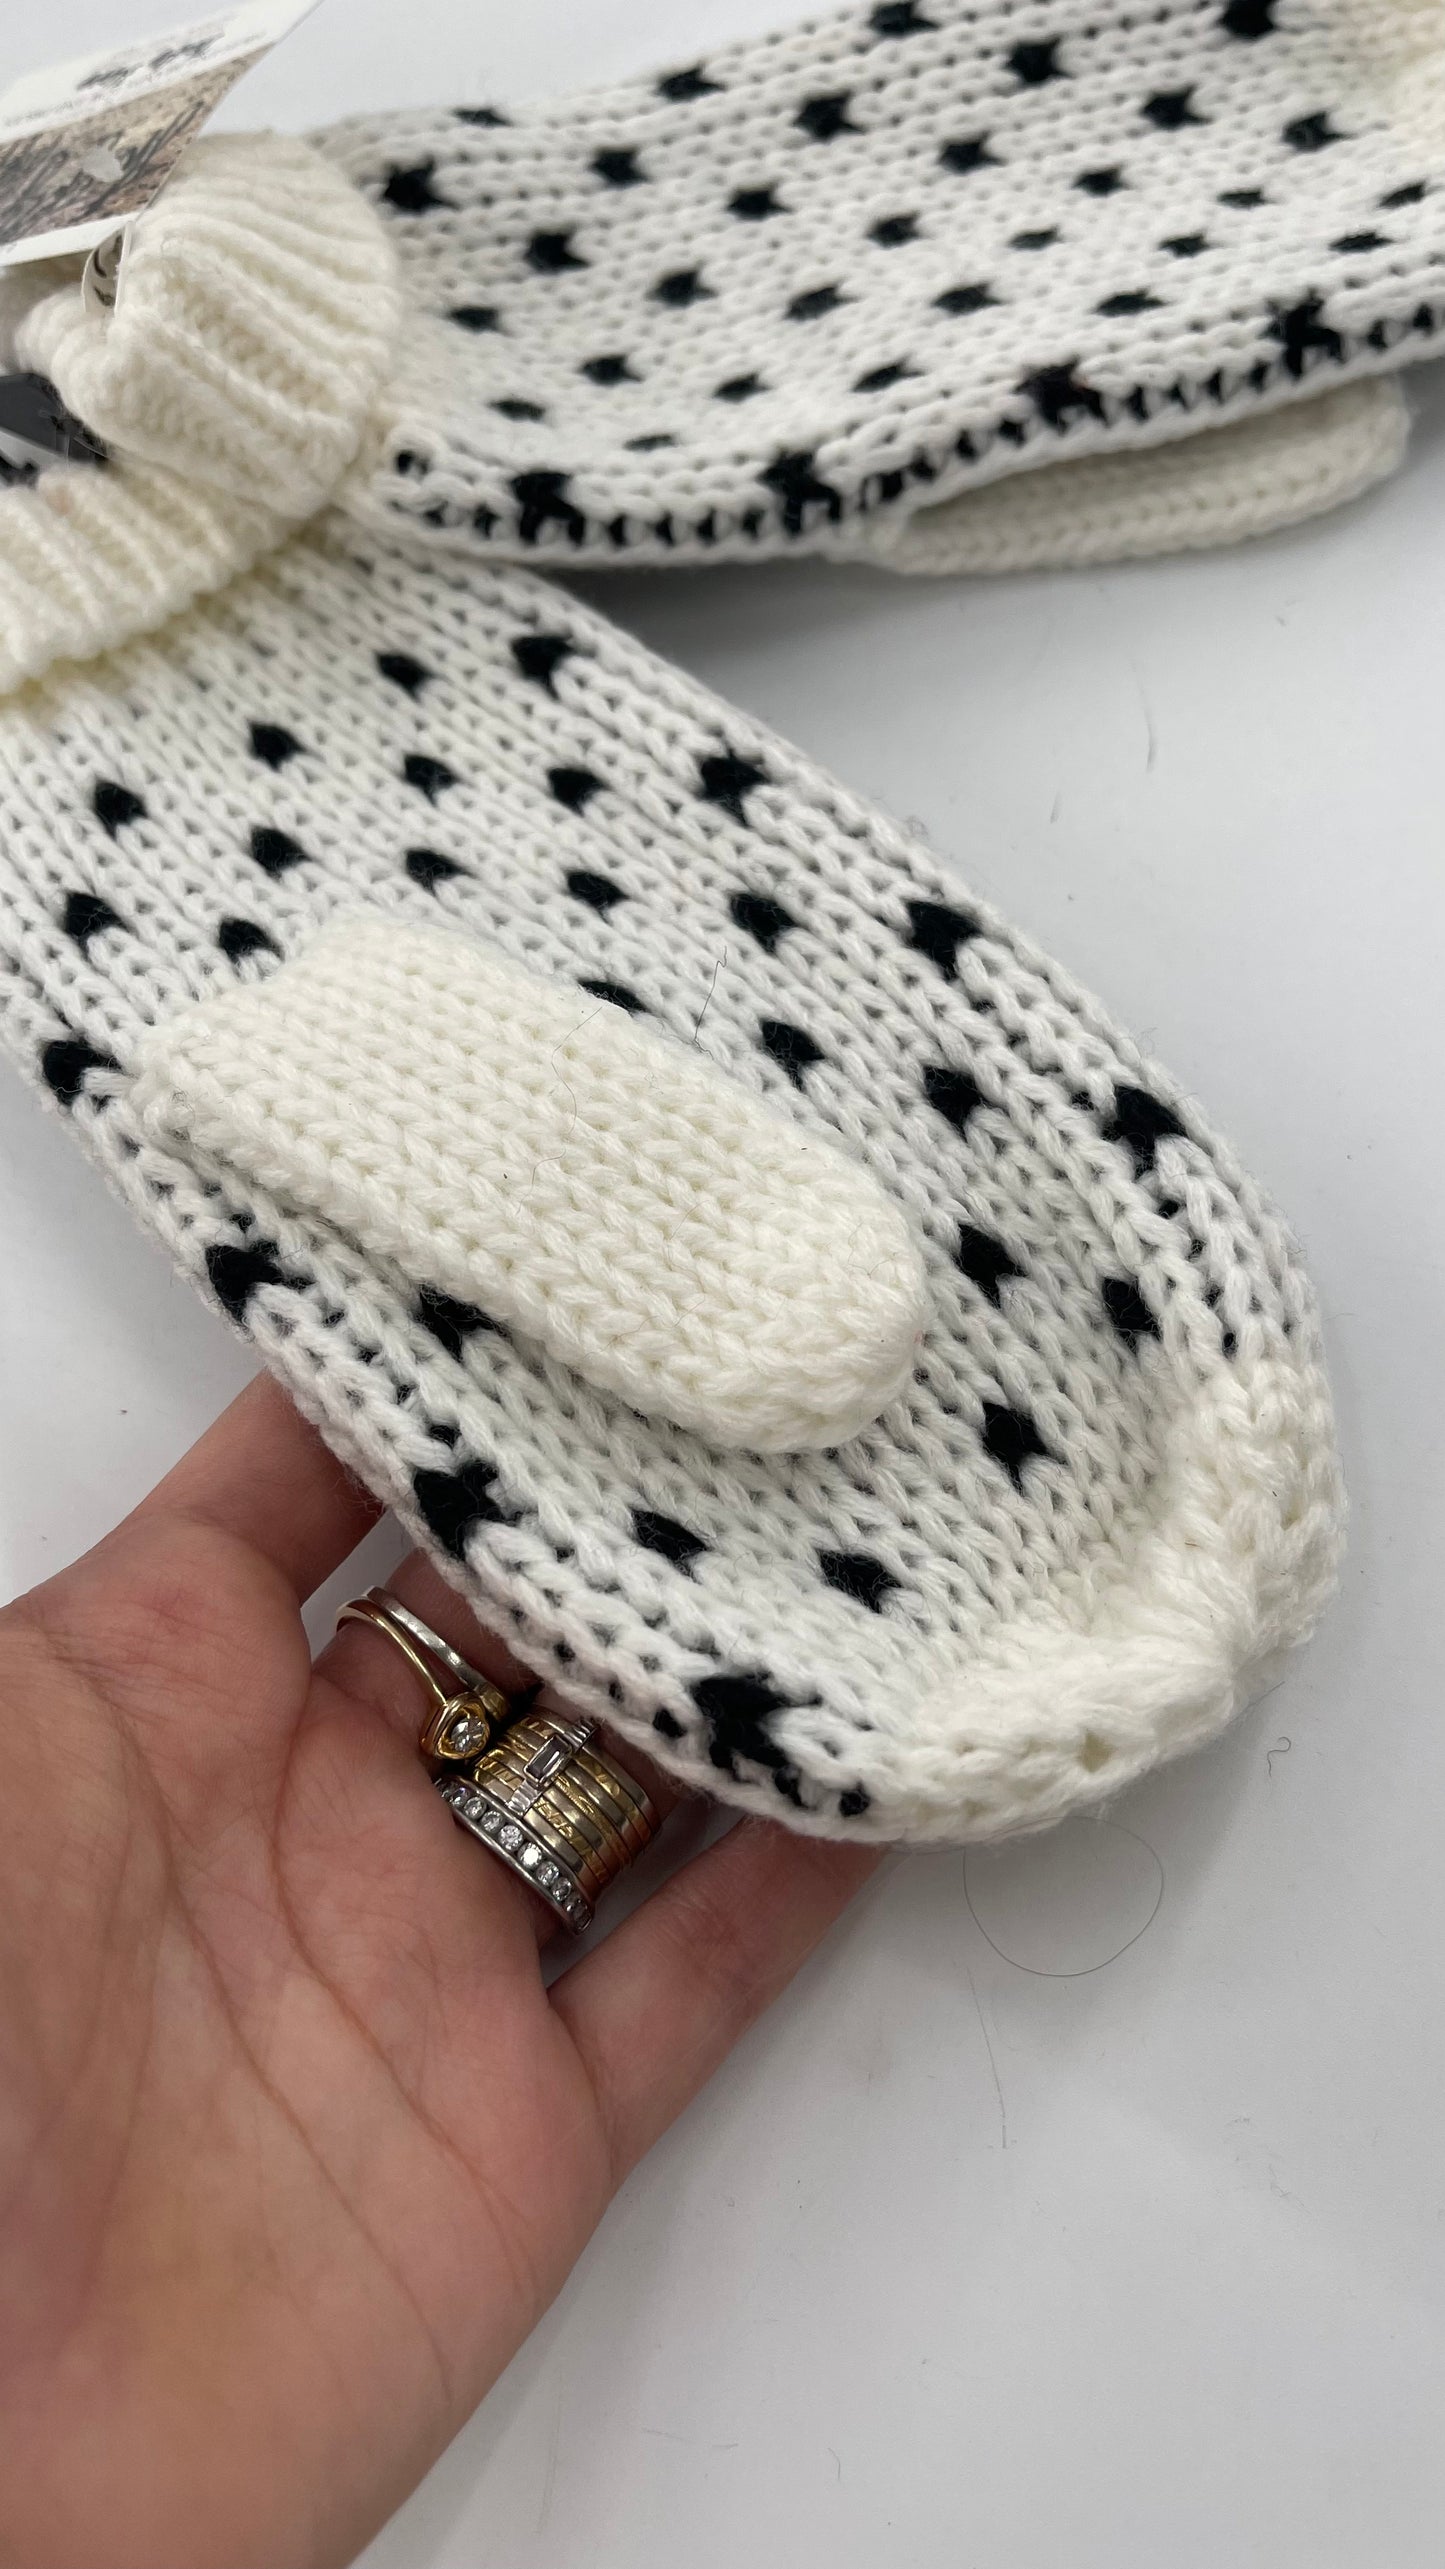 Free People White Knit Mittens with Black Pattern